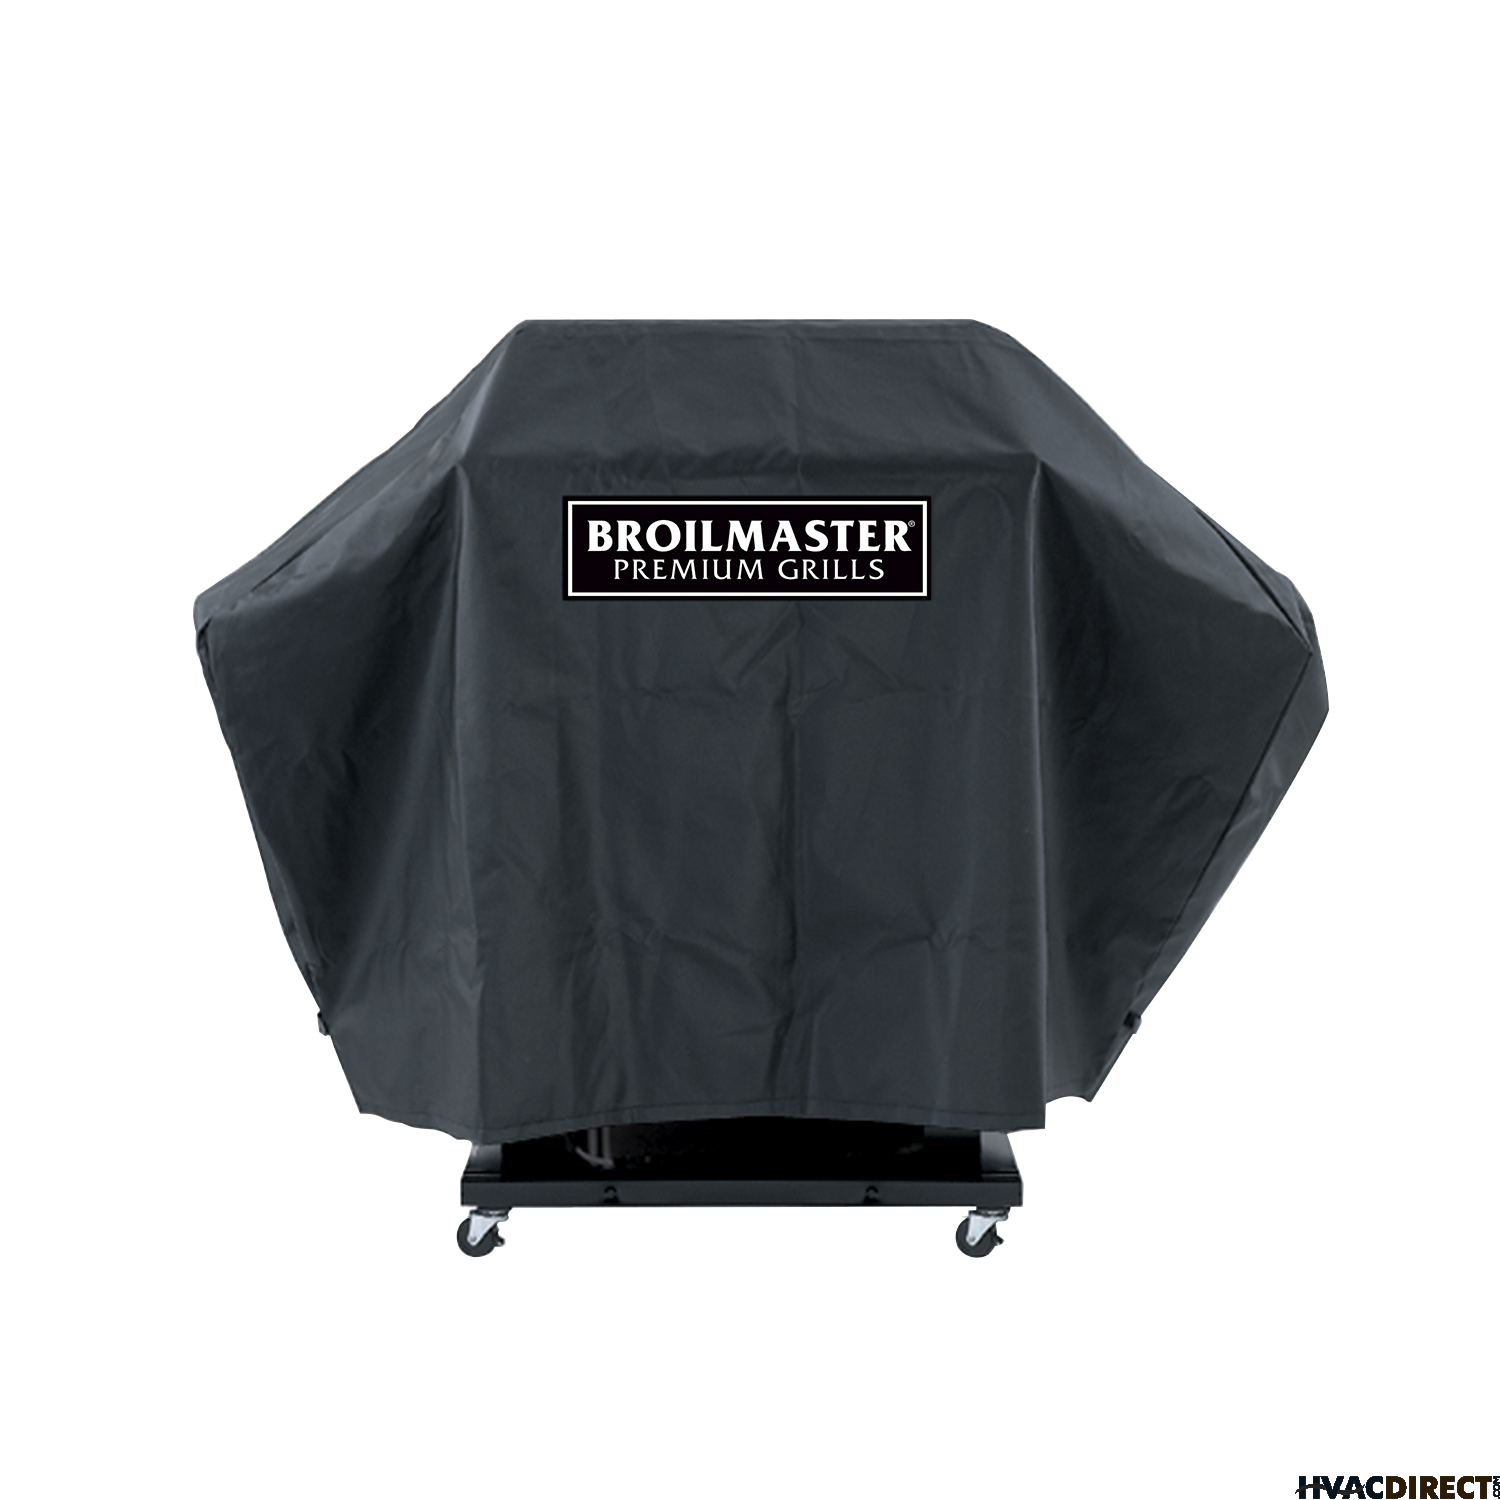 Broilmaster Full Length Premium Grill Cover For P, H, R, And T Series Grills On Cart With Two Side Shelves - DPA110